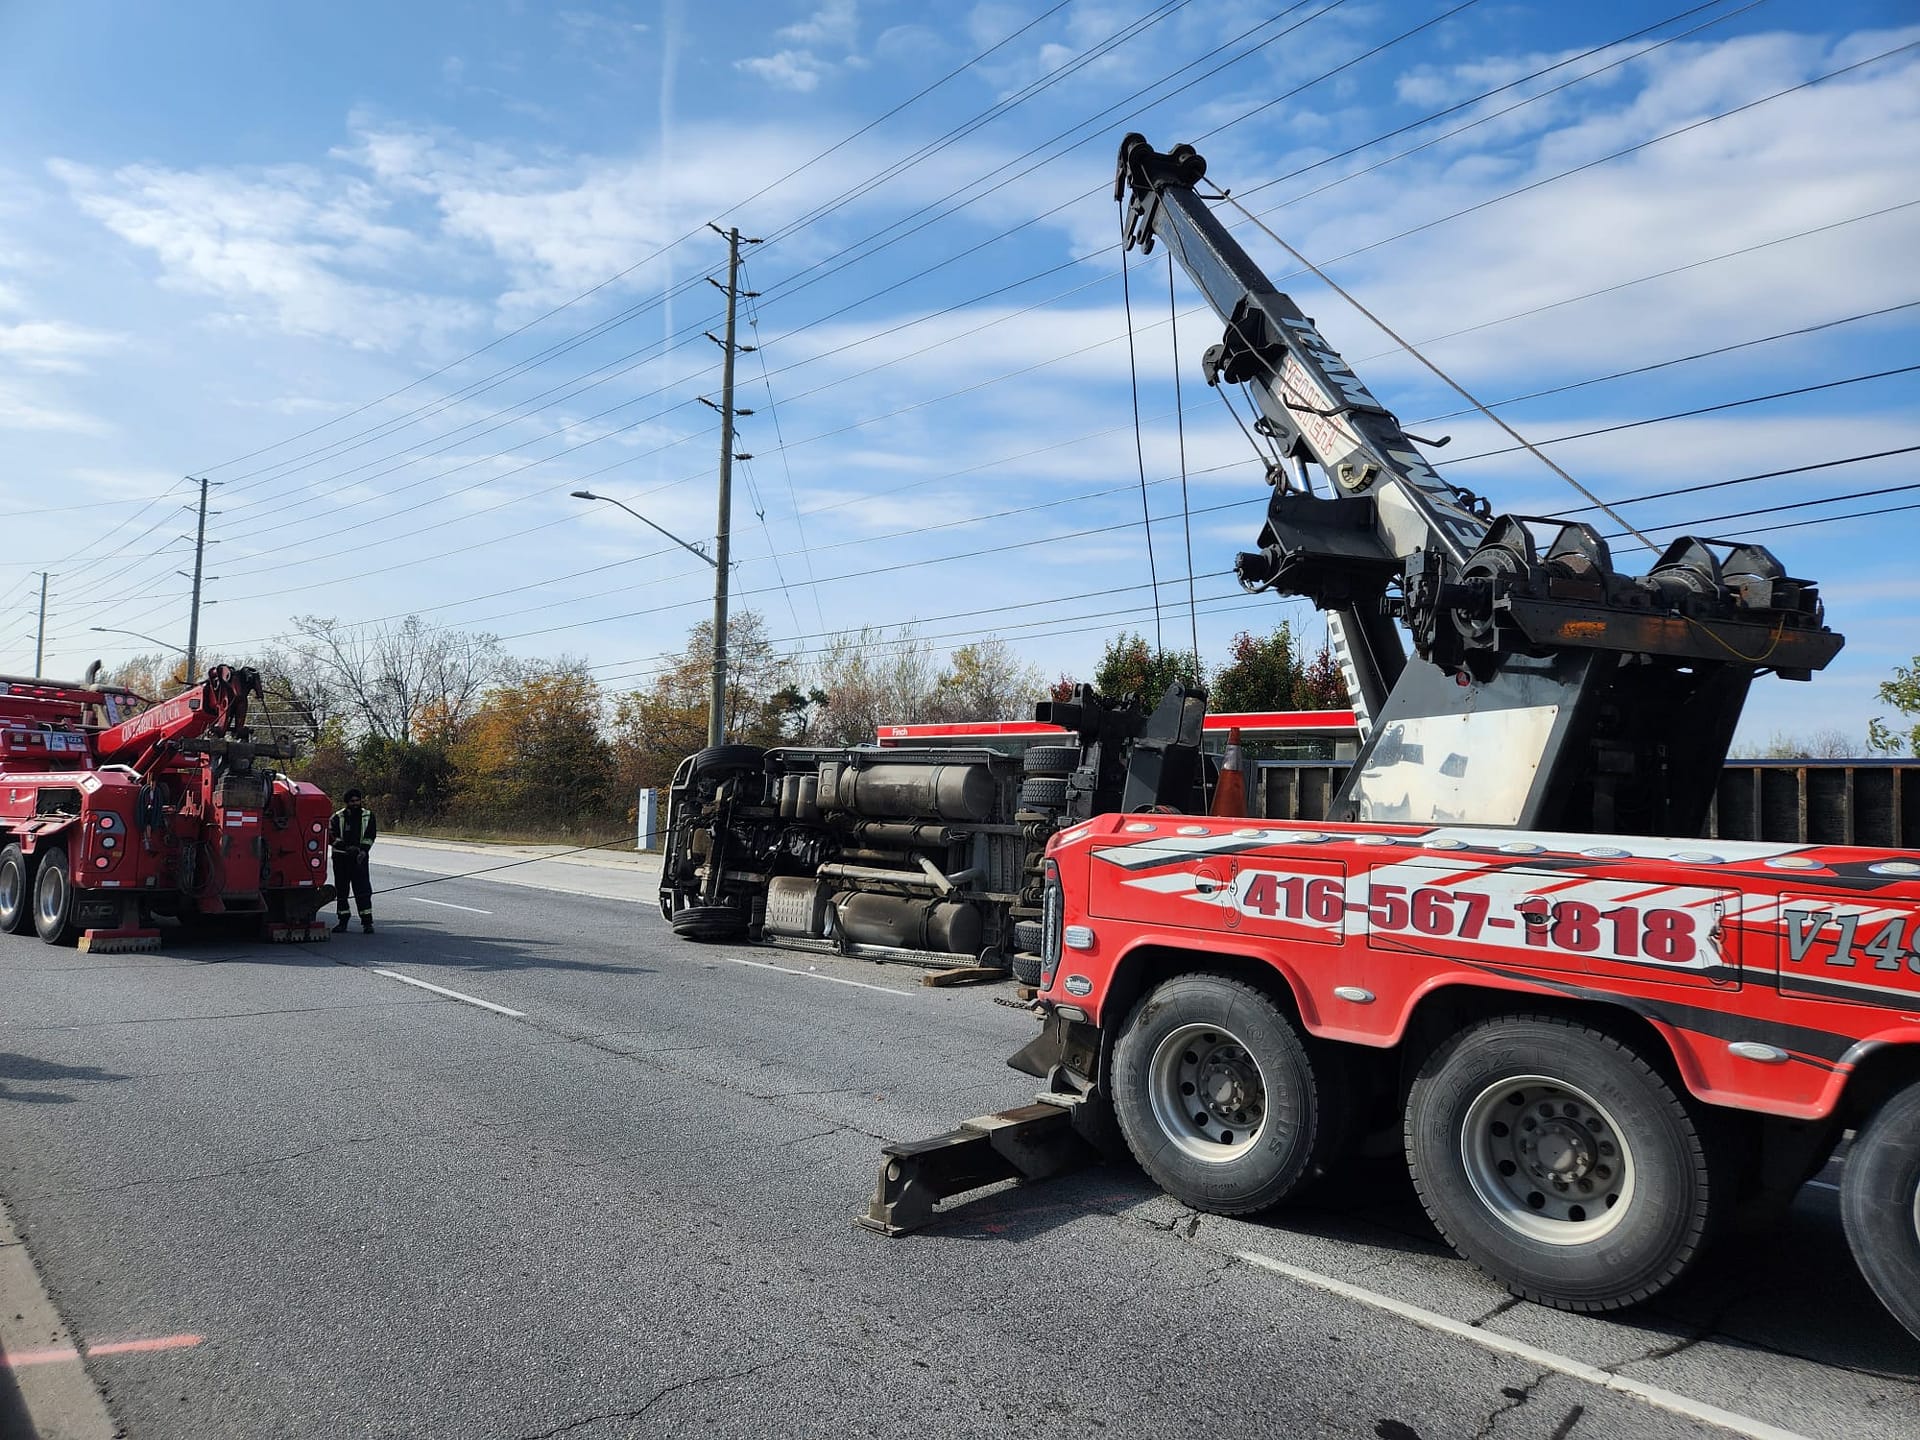 Rapid Response on Keele: Tow Trucks Tackle Trailer Rollover